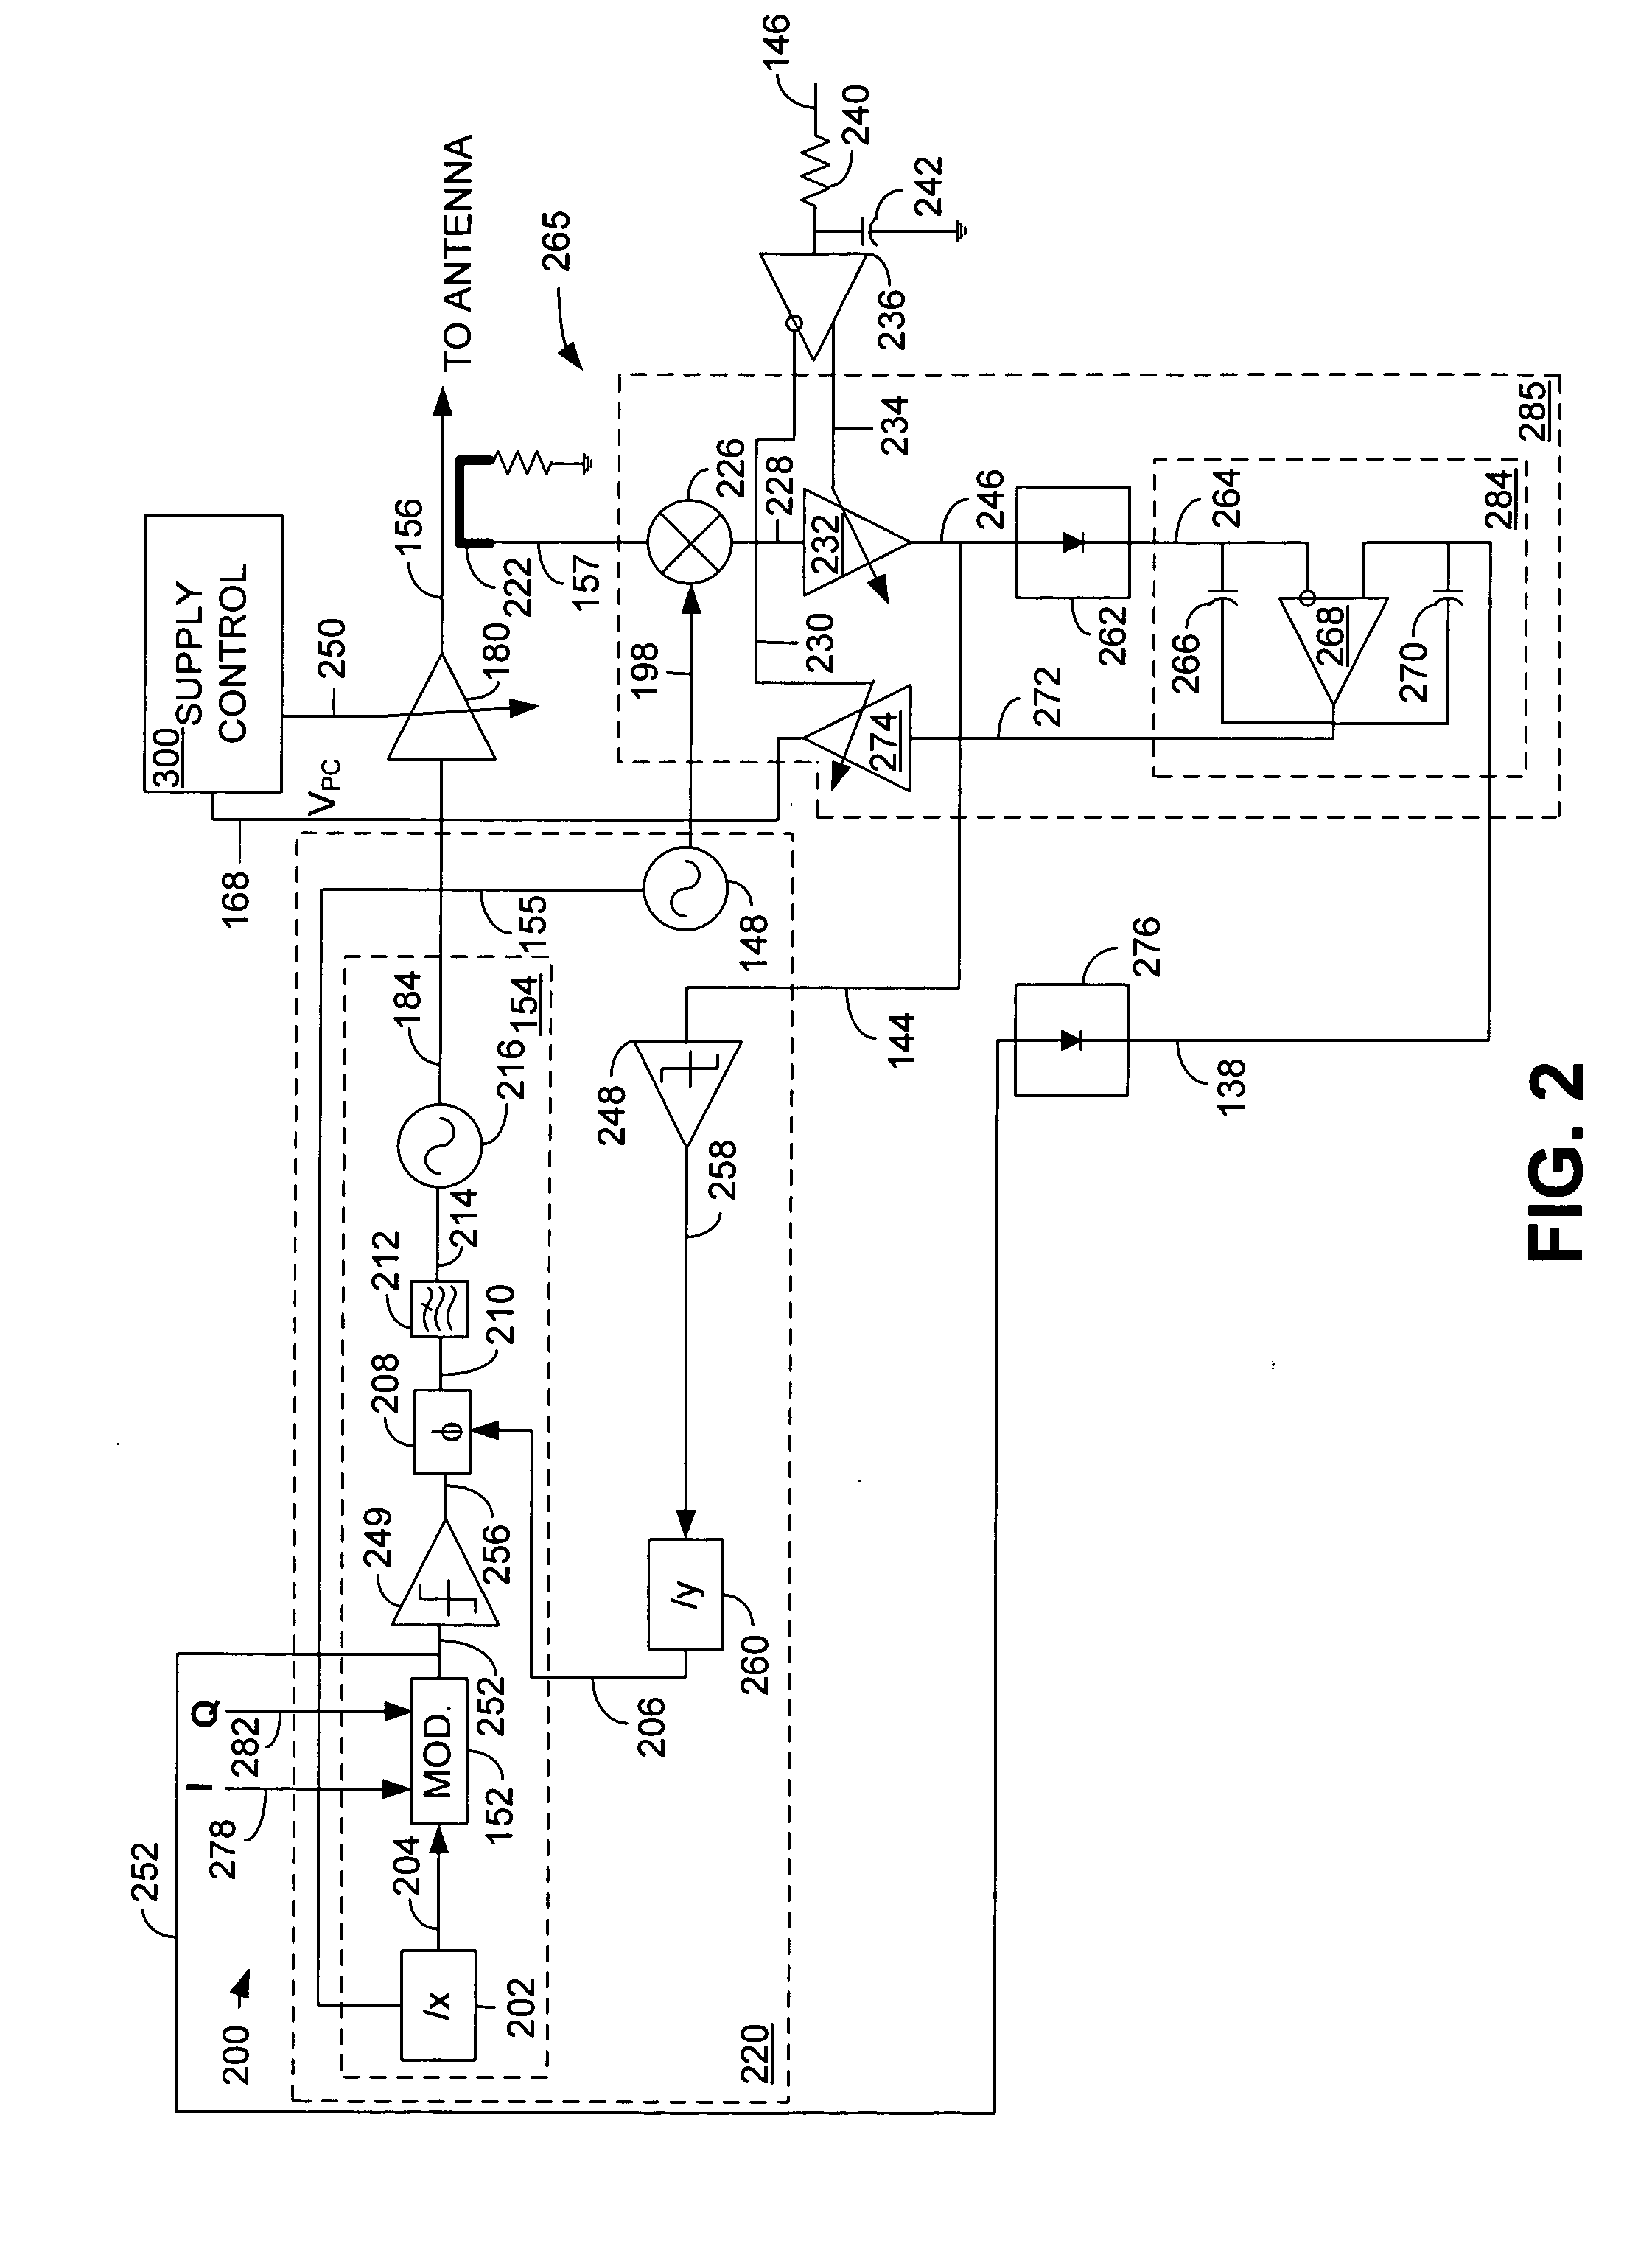 Dual voltage regulator for a supply voltage controlled power amplifier in a closed power control loop